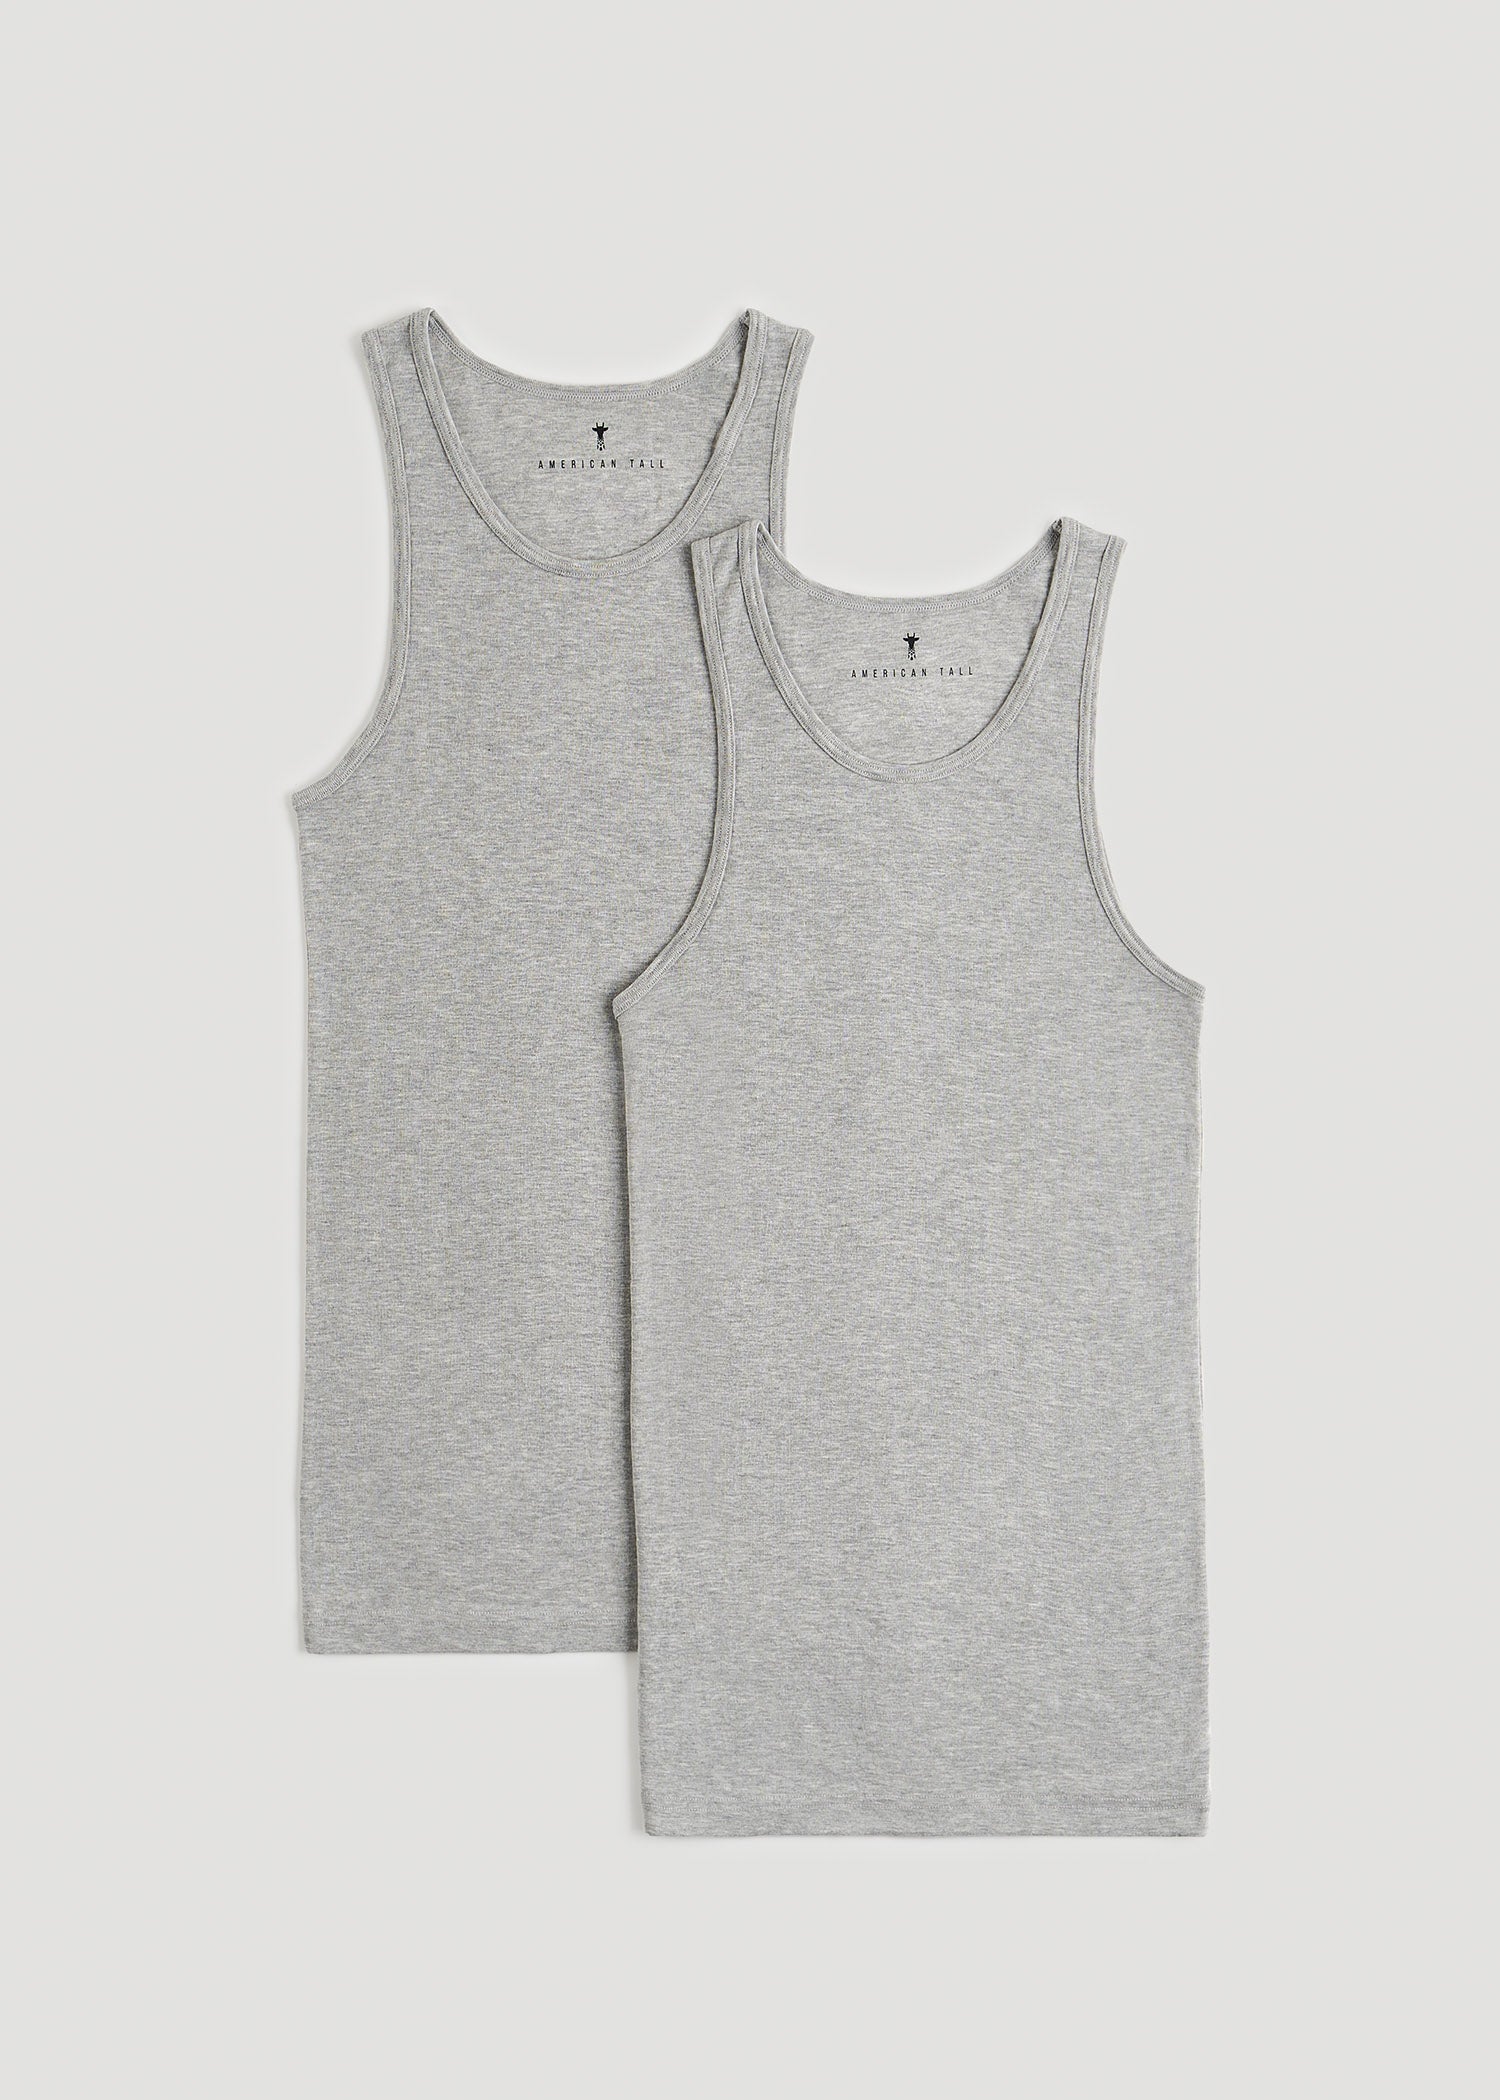 Men's Tall Ribbed Undershirt Tank Top in Grey Mix (2-Pack)